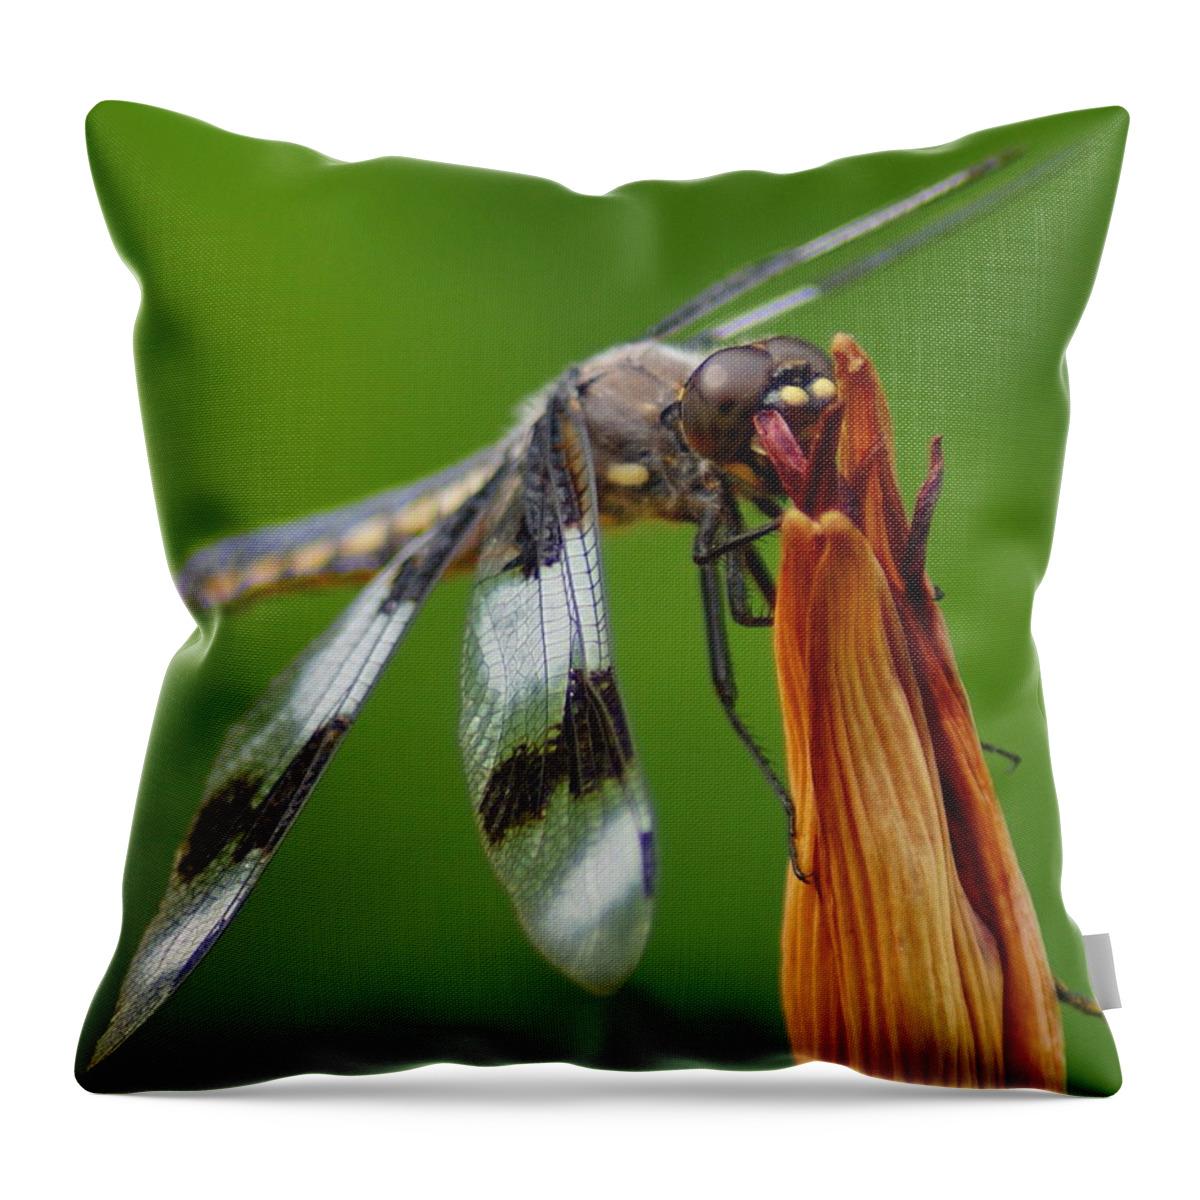 Dragonfly Throw Pillow featuring the photograph Dragonfly Portrait 2 by Ben Upham III